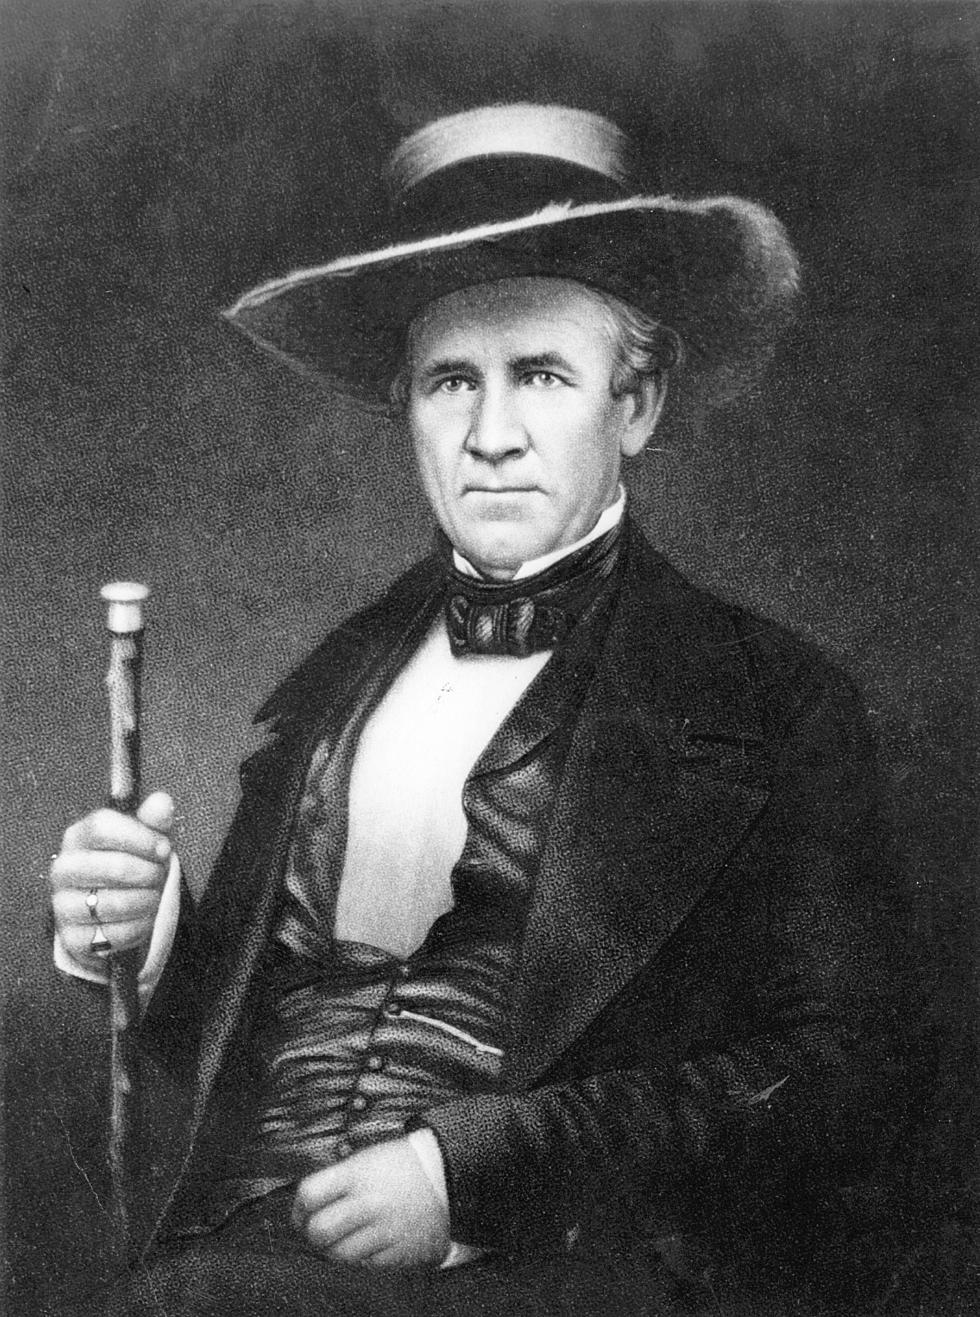 Texas Group Calls for Removal of Sam Houston Statue in Houston